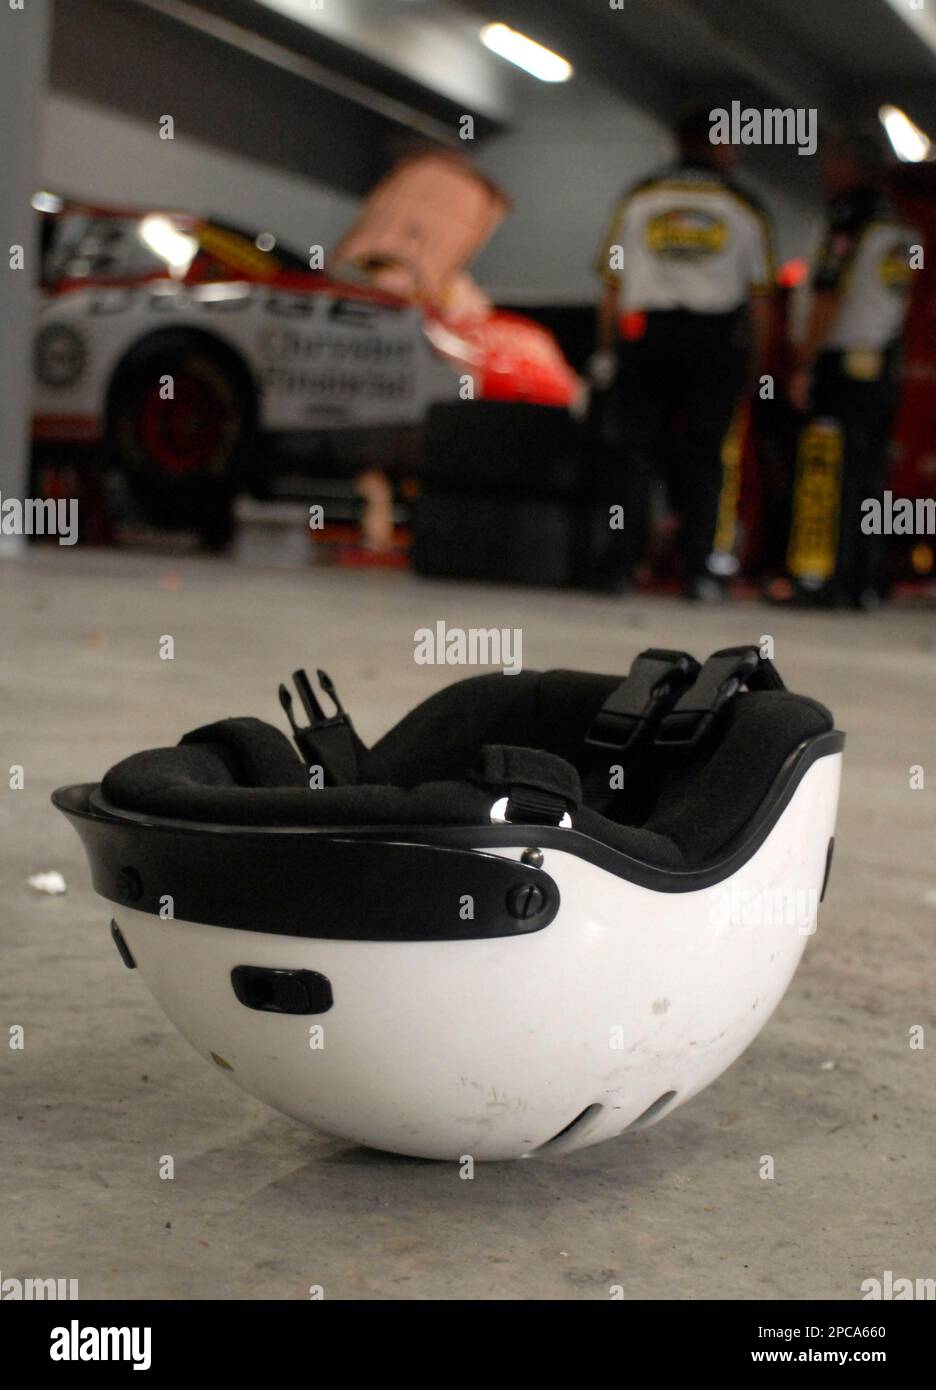 https://c8.alamy.com/comp/2PCA660/a-helmet-lies-discarded-on-the-floor-as-pit-crew-members-pack-their-gear-for-the-last-time-in-2006-following-the-season-finale-ford-400-auto-race-at-homestead-miami-speedway-in-homestead-fla-sunday-nov-19-2006-greg-biffle-won-the-race-and-jimmie-johnson-won-the-championshipap-photopaul-kizzle-2PCA660.jpg